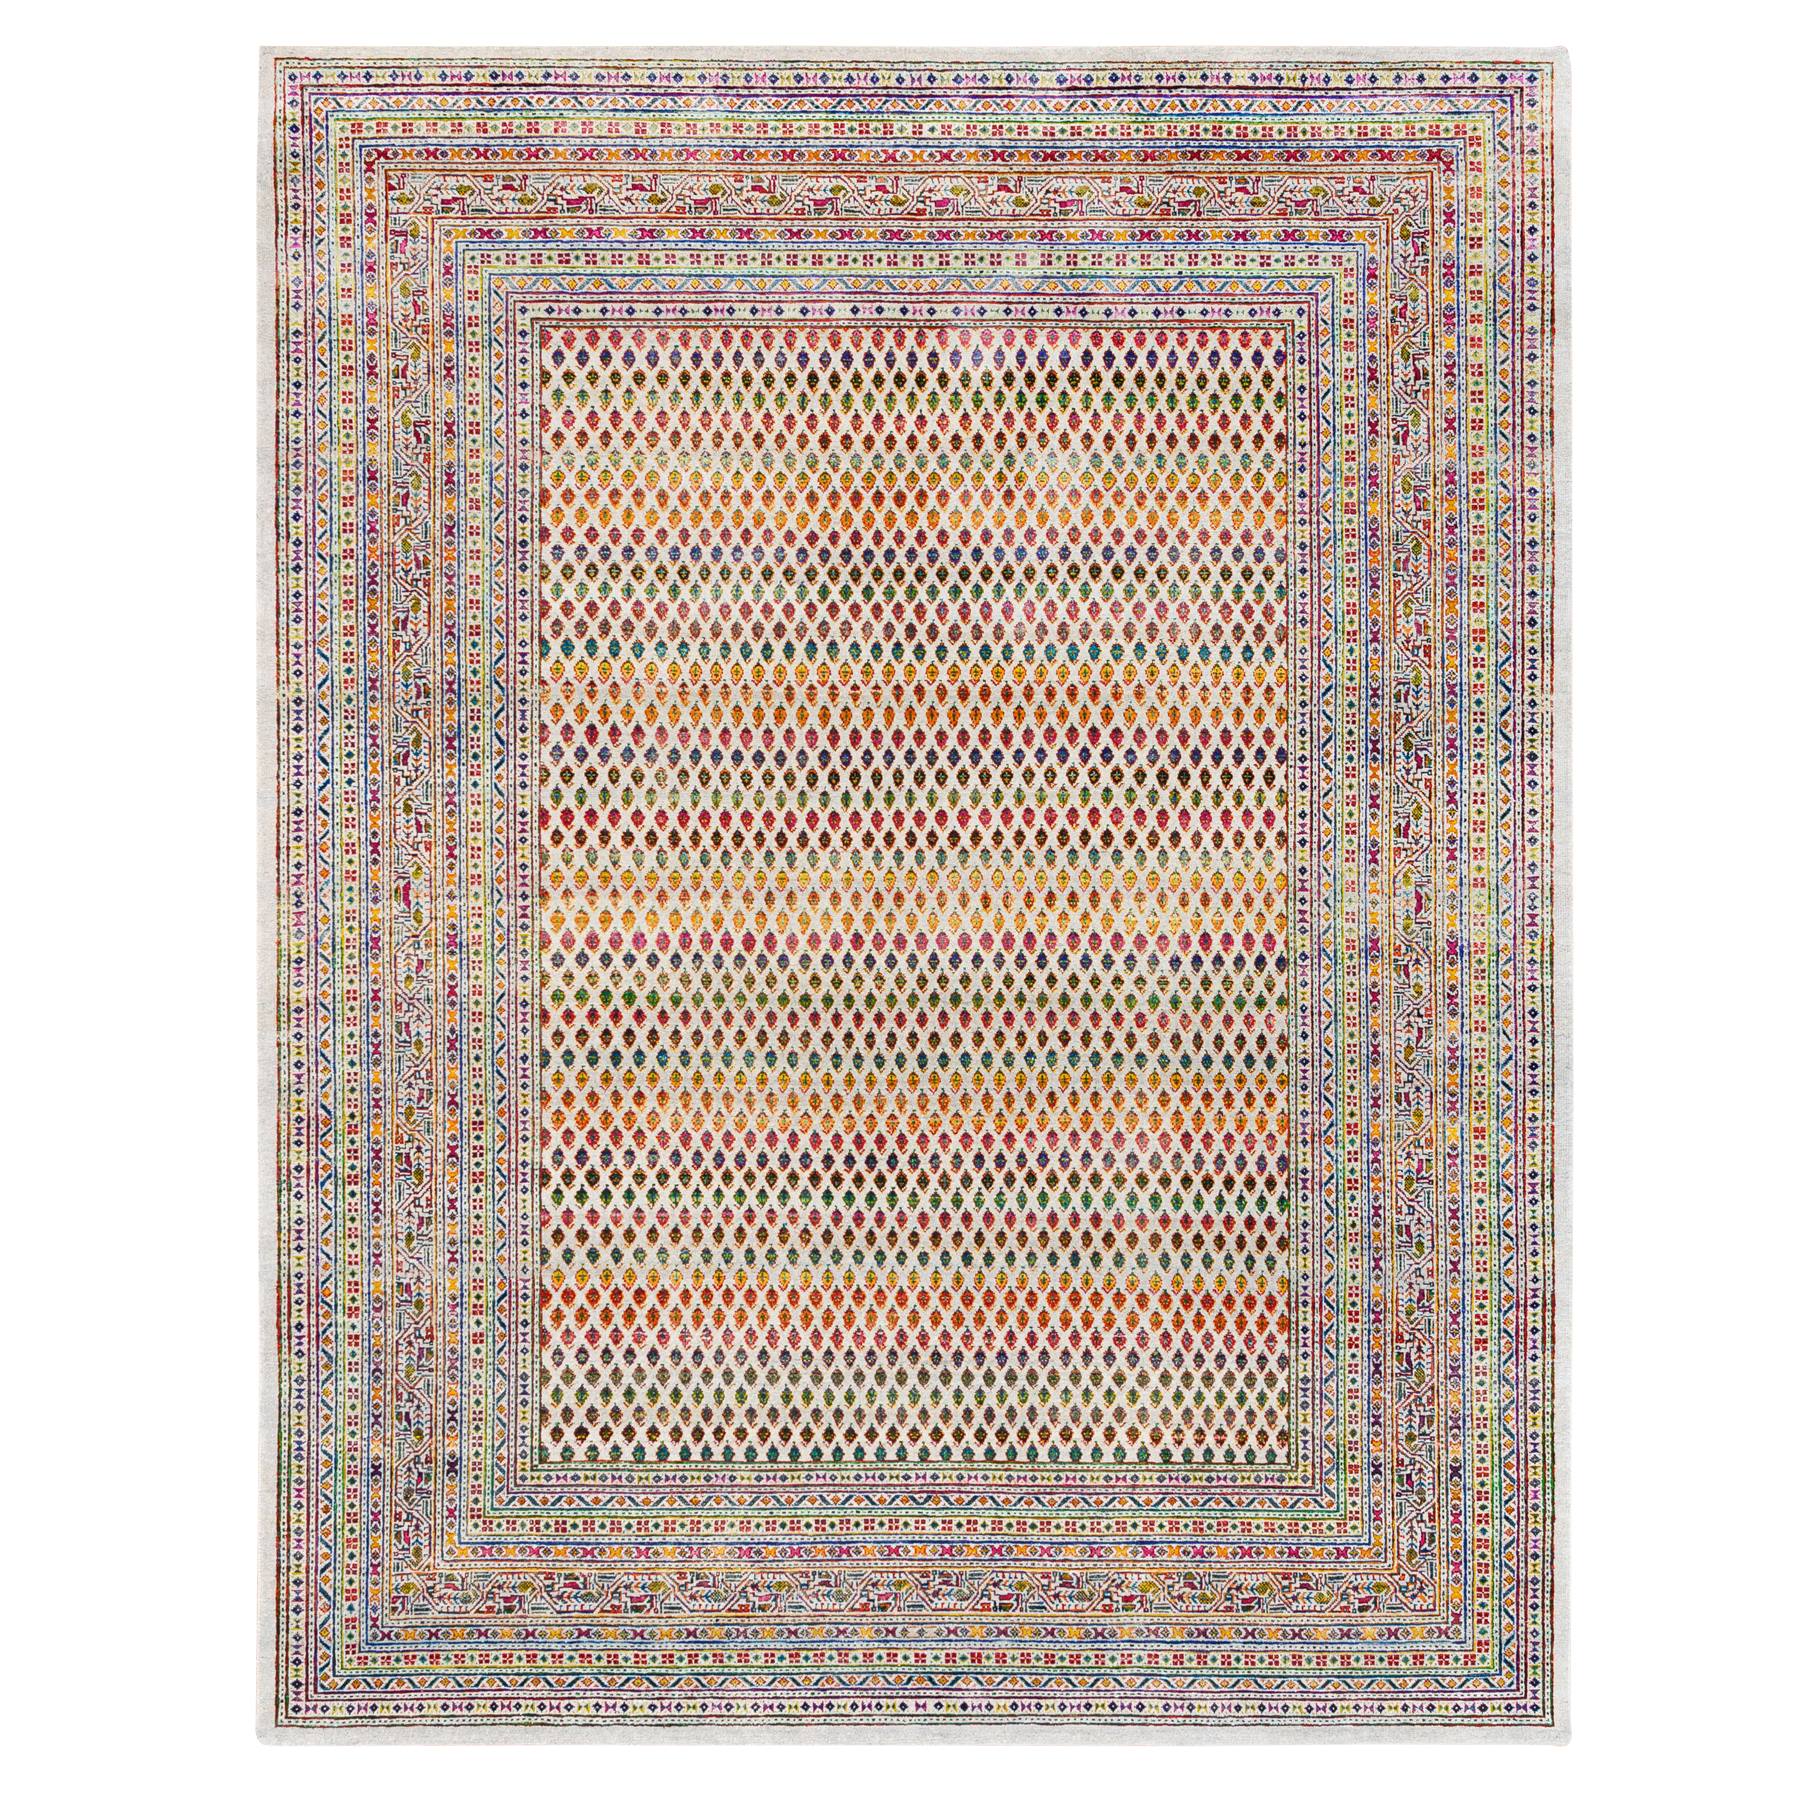 7'9"x10' Colorful Wool And Sari Silk Sarouk Mir Inspired With Repetitive Boteh Design Hand Woven Oriental Rug 